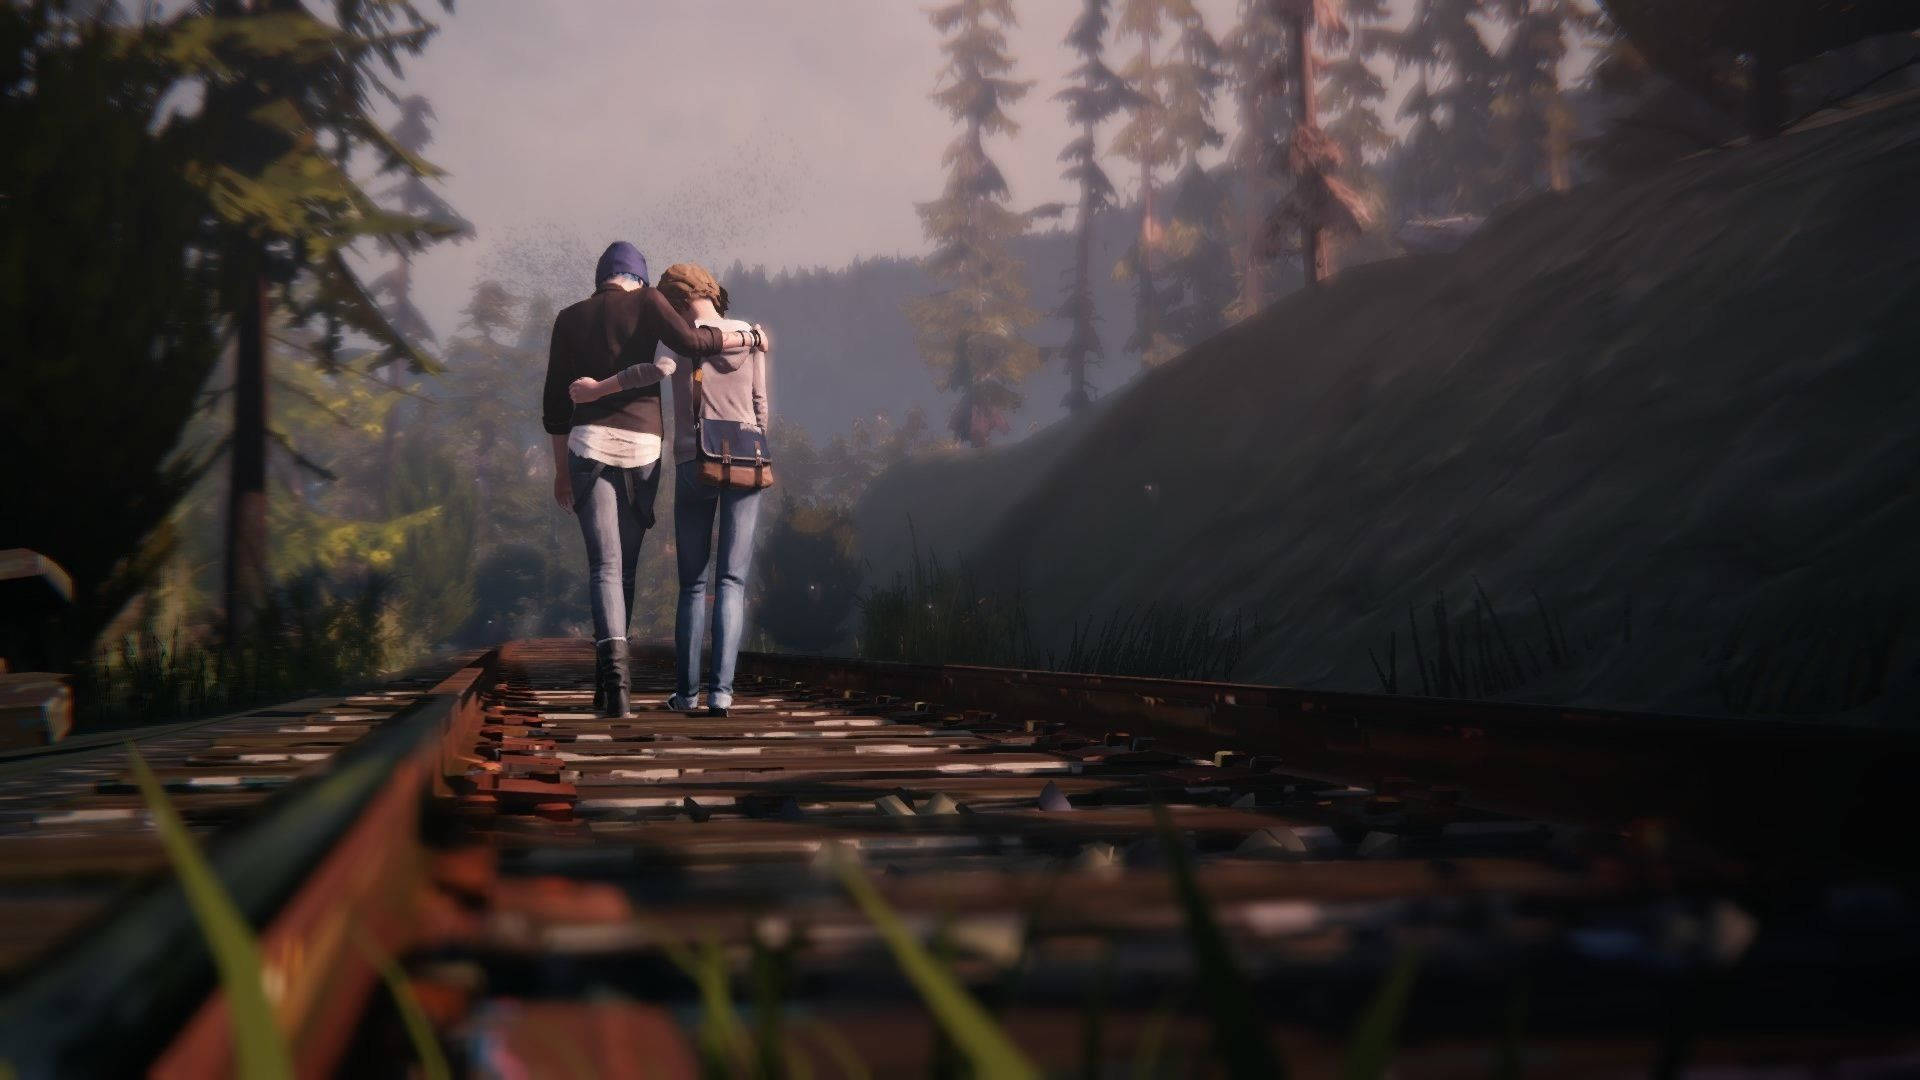 Life Is Strange 1920X1080 Wallpaper and Background Image